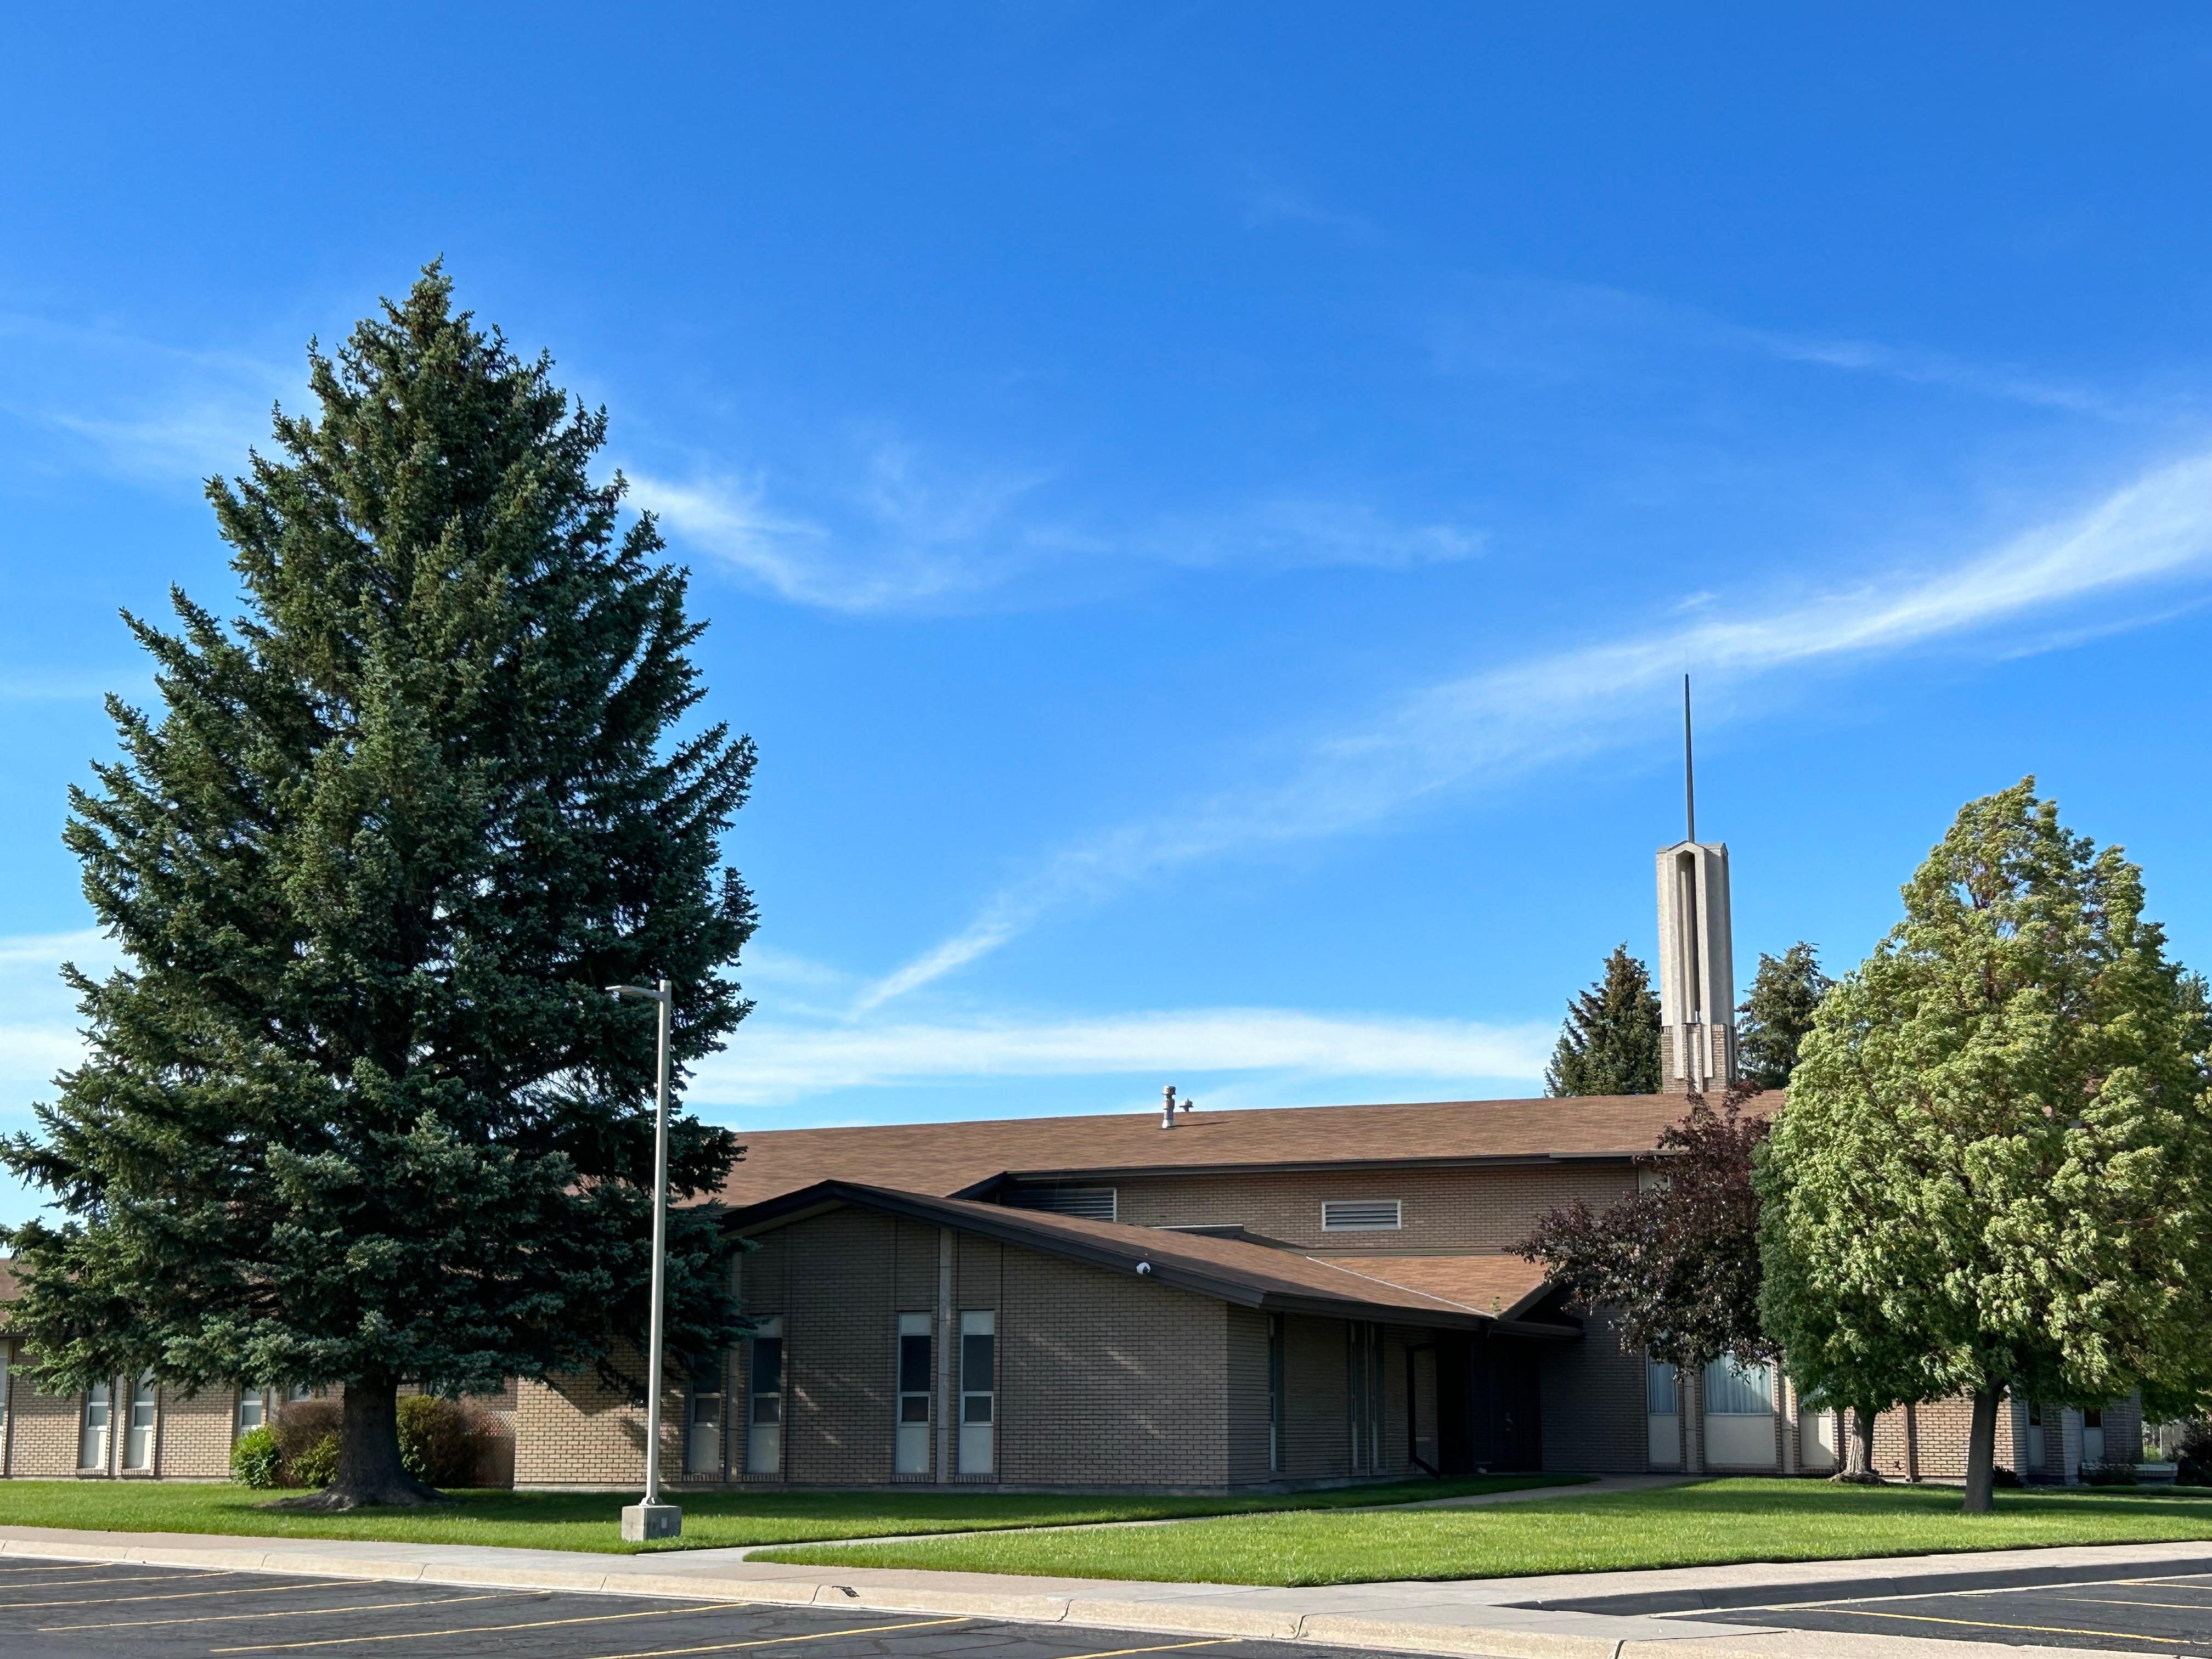 South side of the Fort Hall Building of The Church of Jesus Christ of Latter-Day Saints located at 333 South Treaty Hwy (US 91)
in Pocatello, ID.